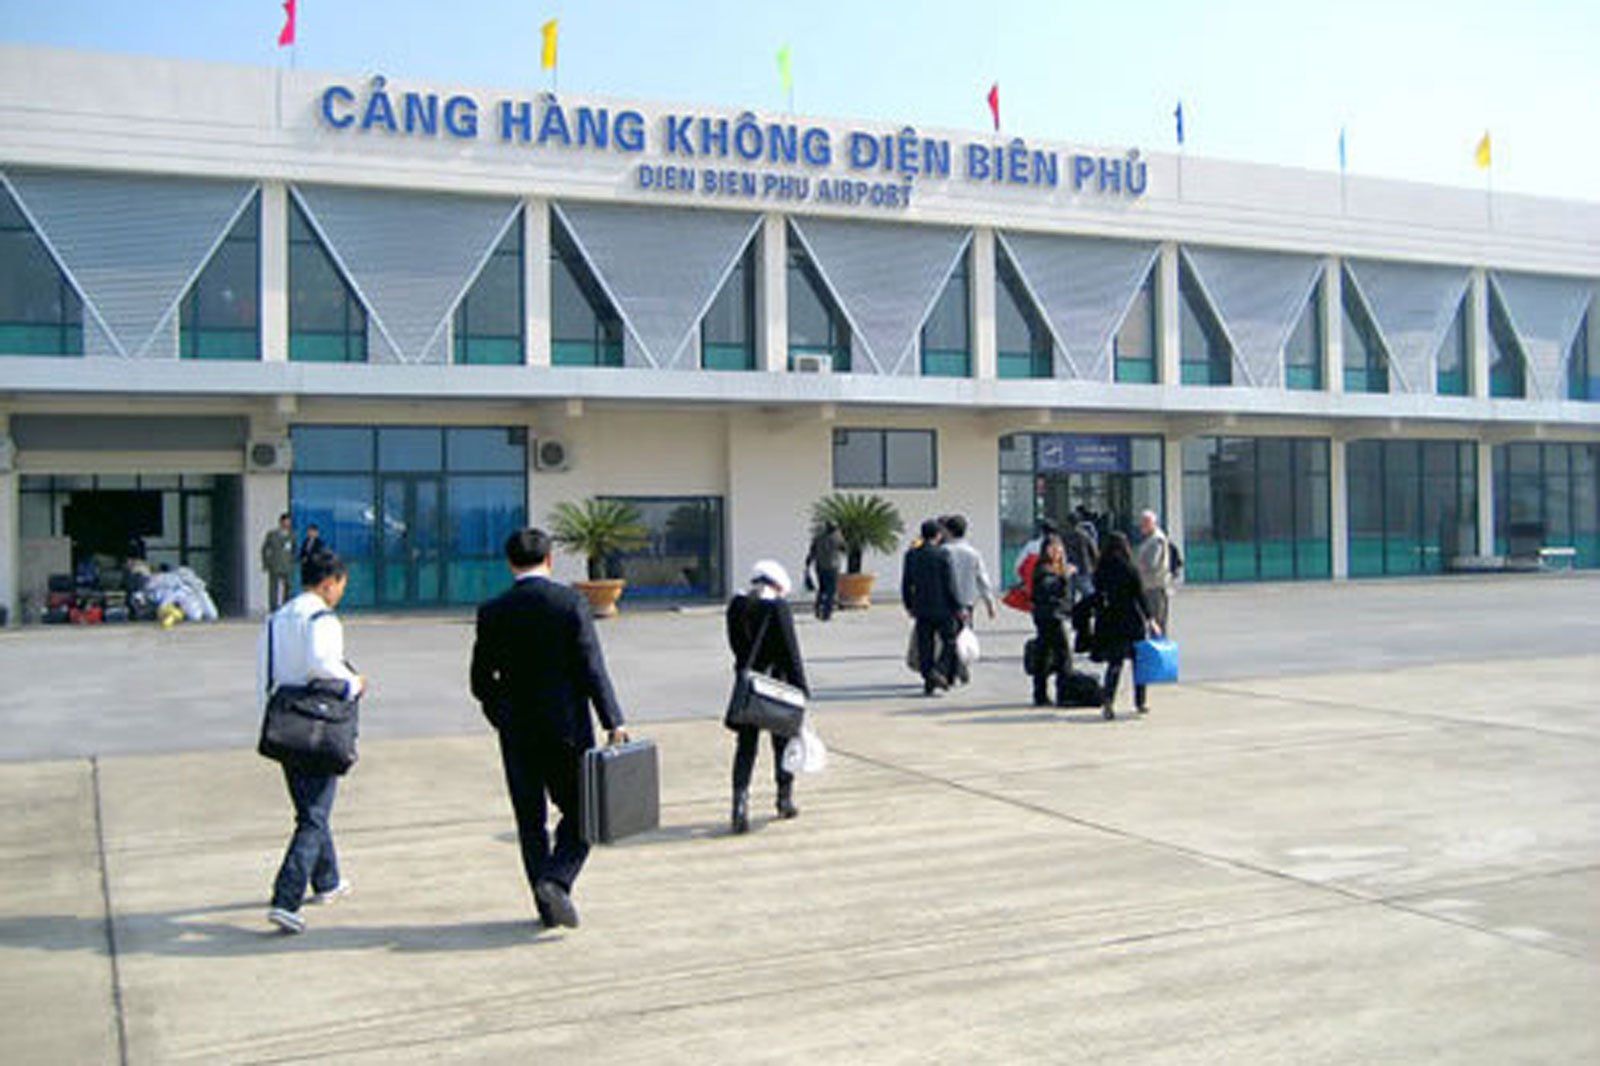 A group of people walking in front of an airport building